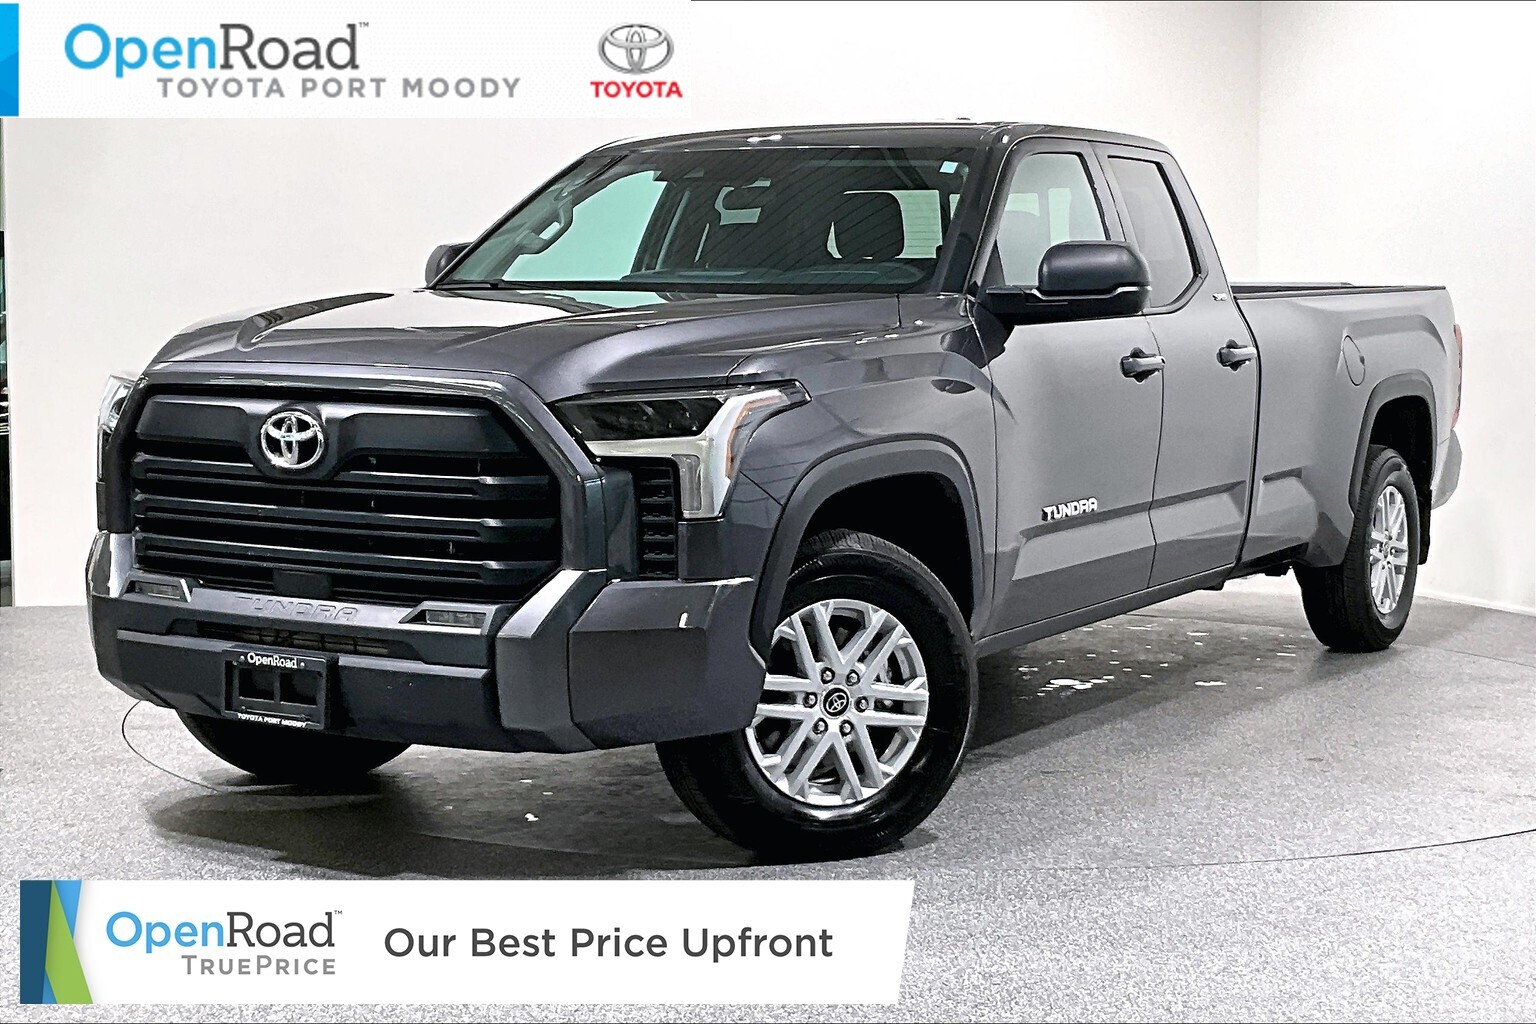 2023 Toyota Tundra Double Cab SR5 L |OpenRoad True Price |Local |One 